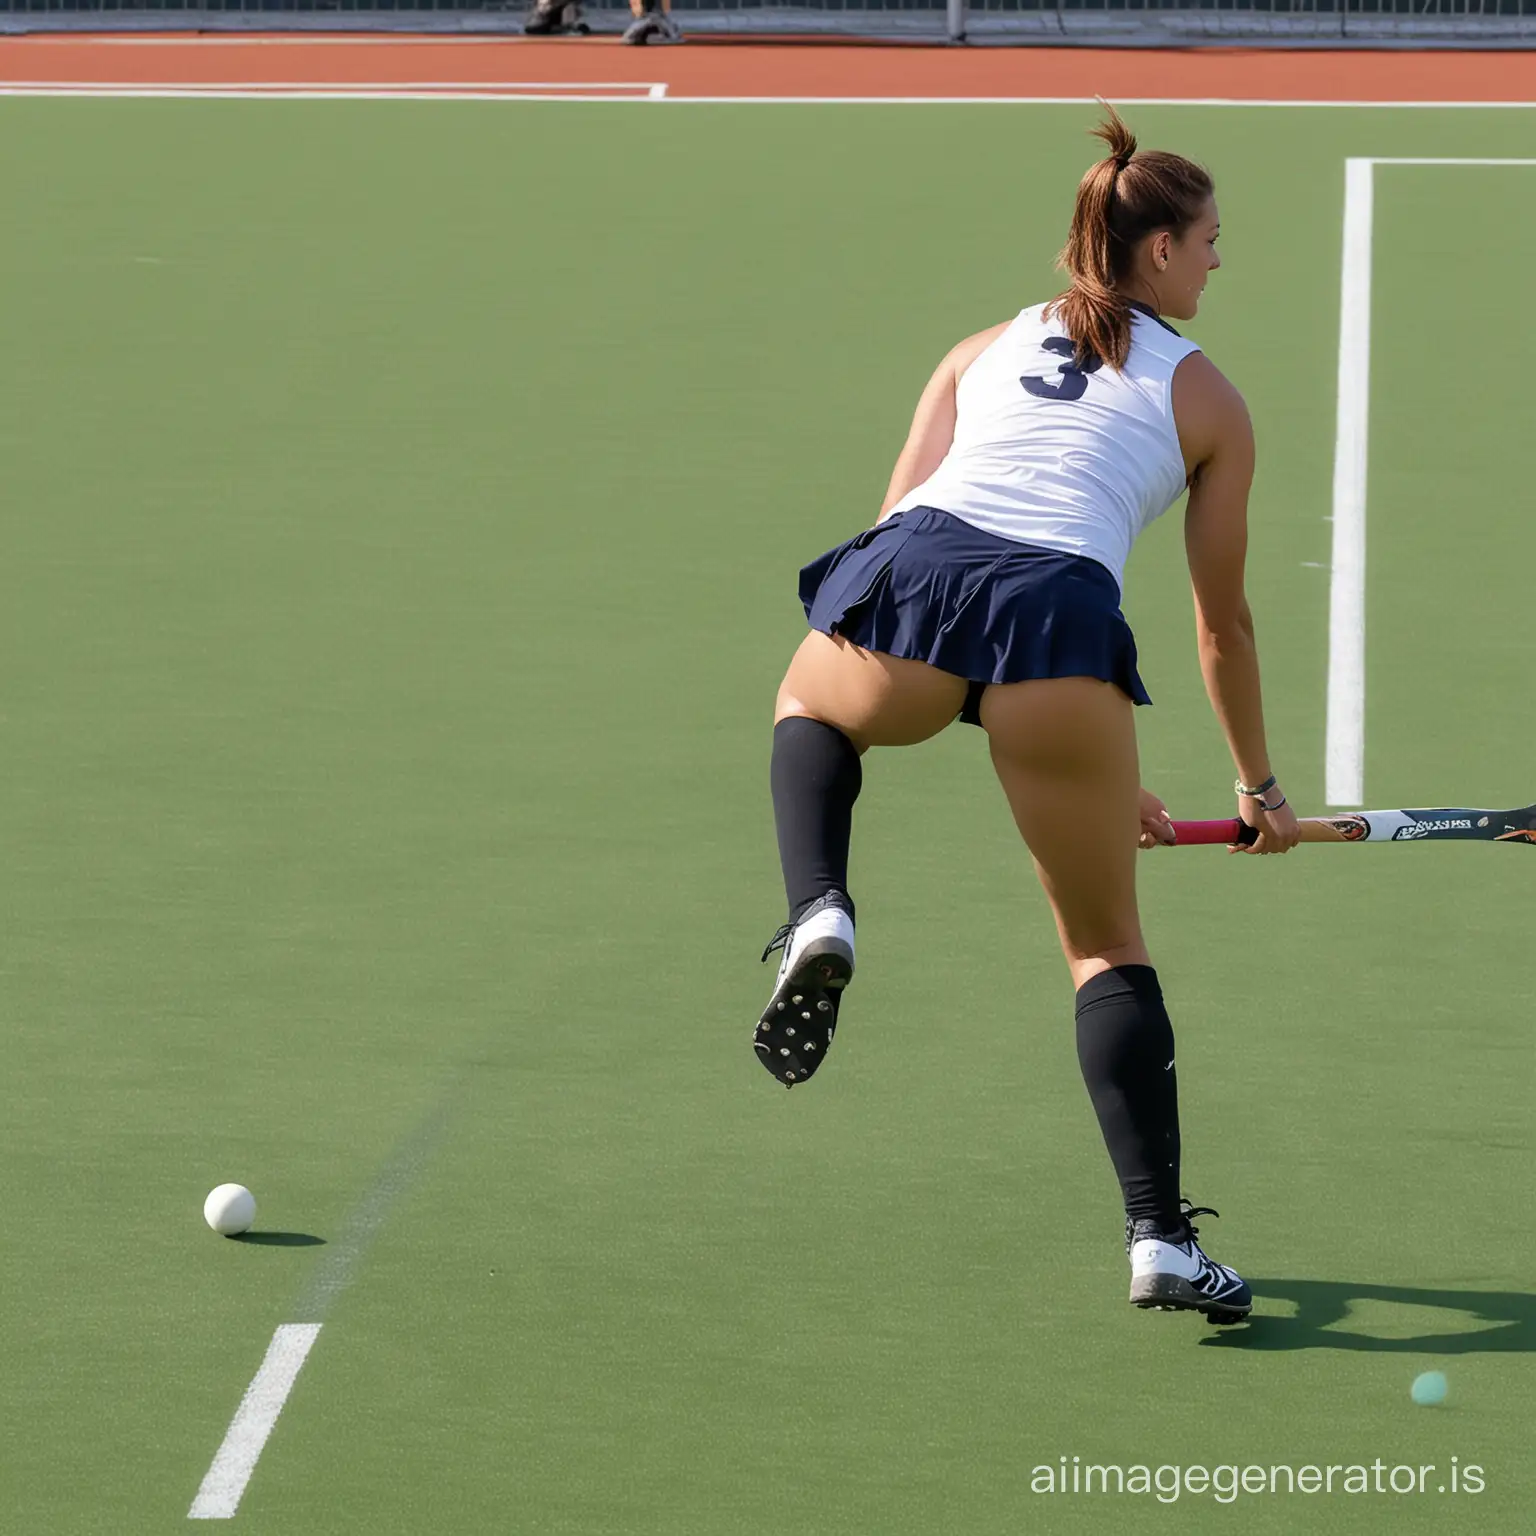 Womens-Field-Hockey-Team-in-Short-Skirts-Playing-on-the-Field